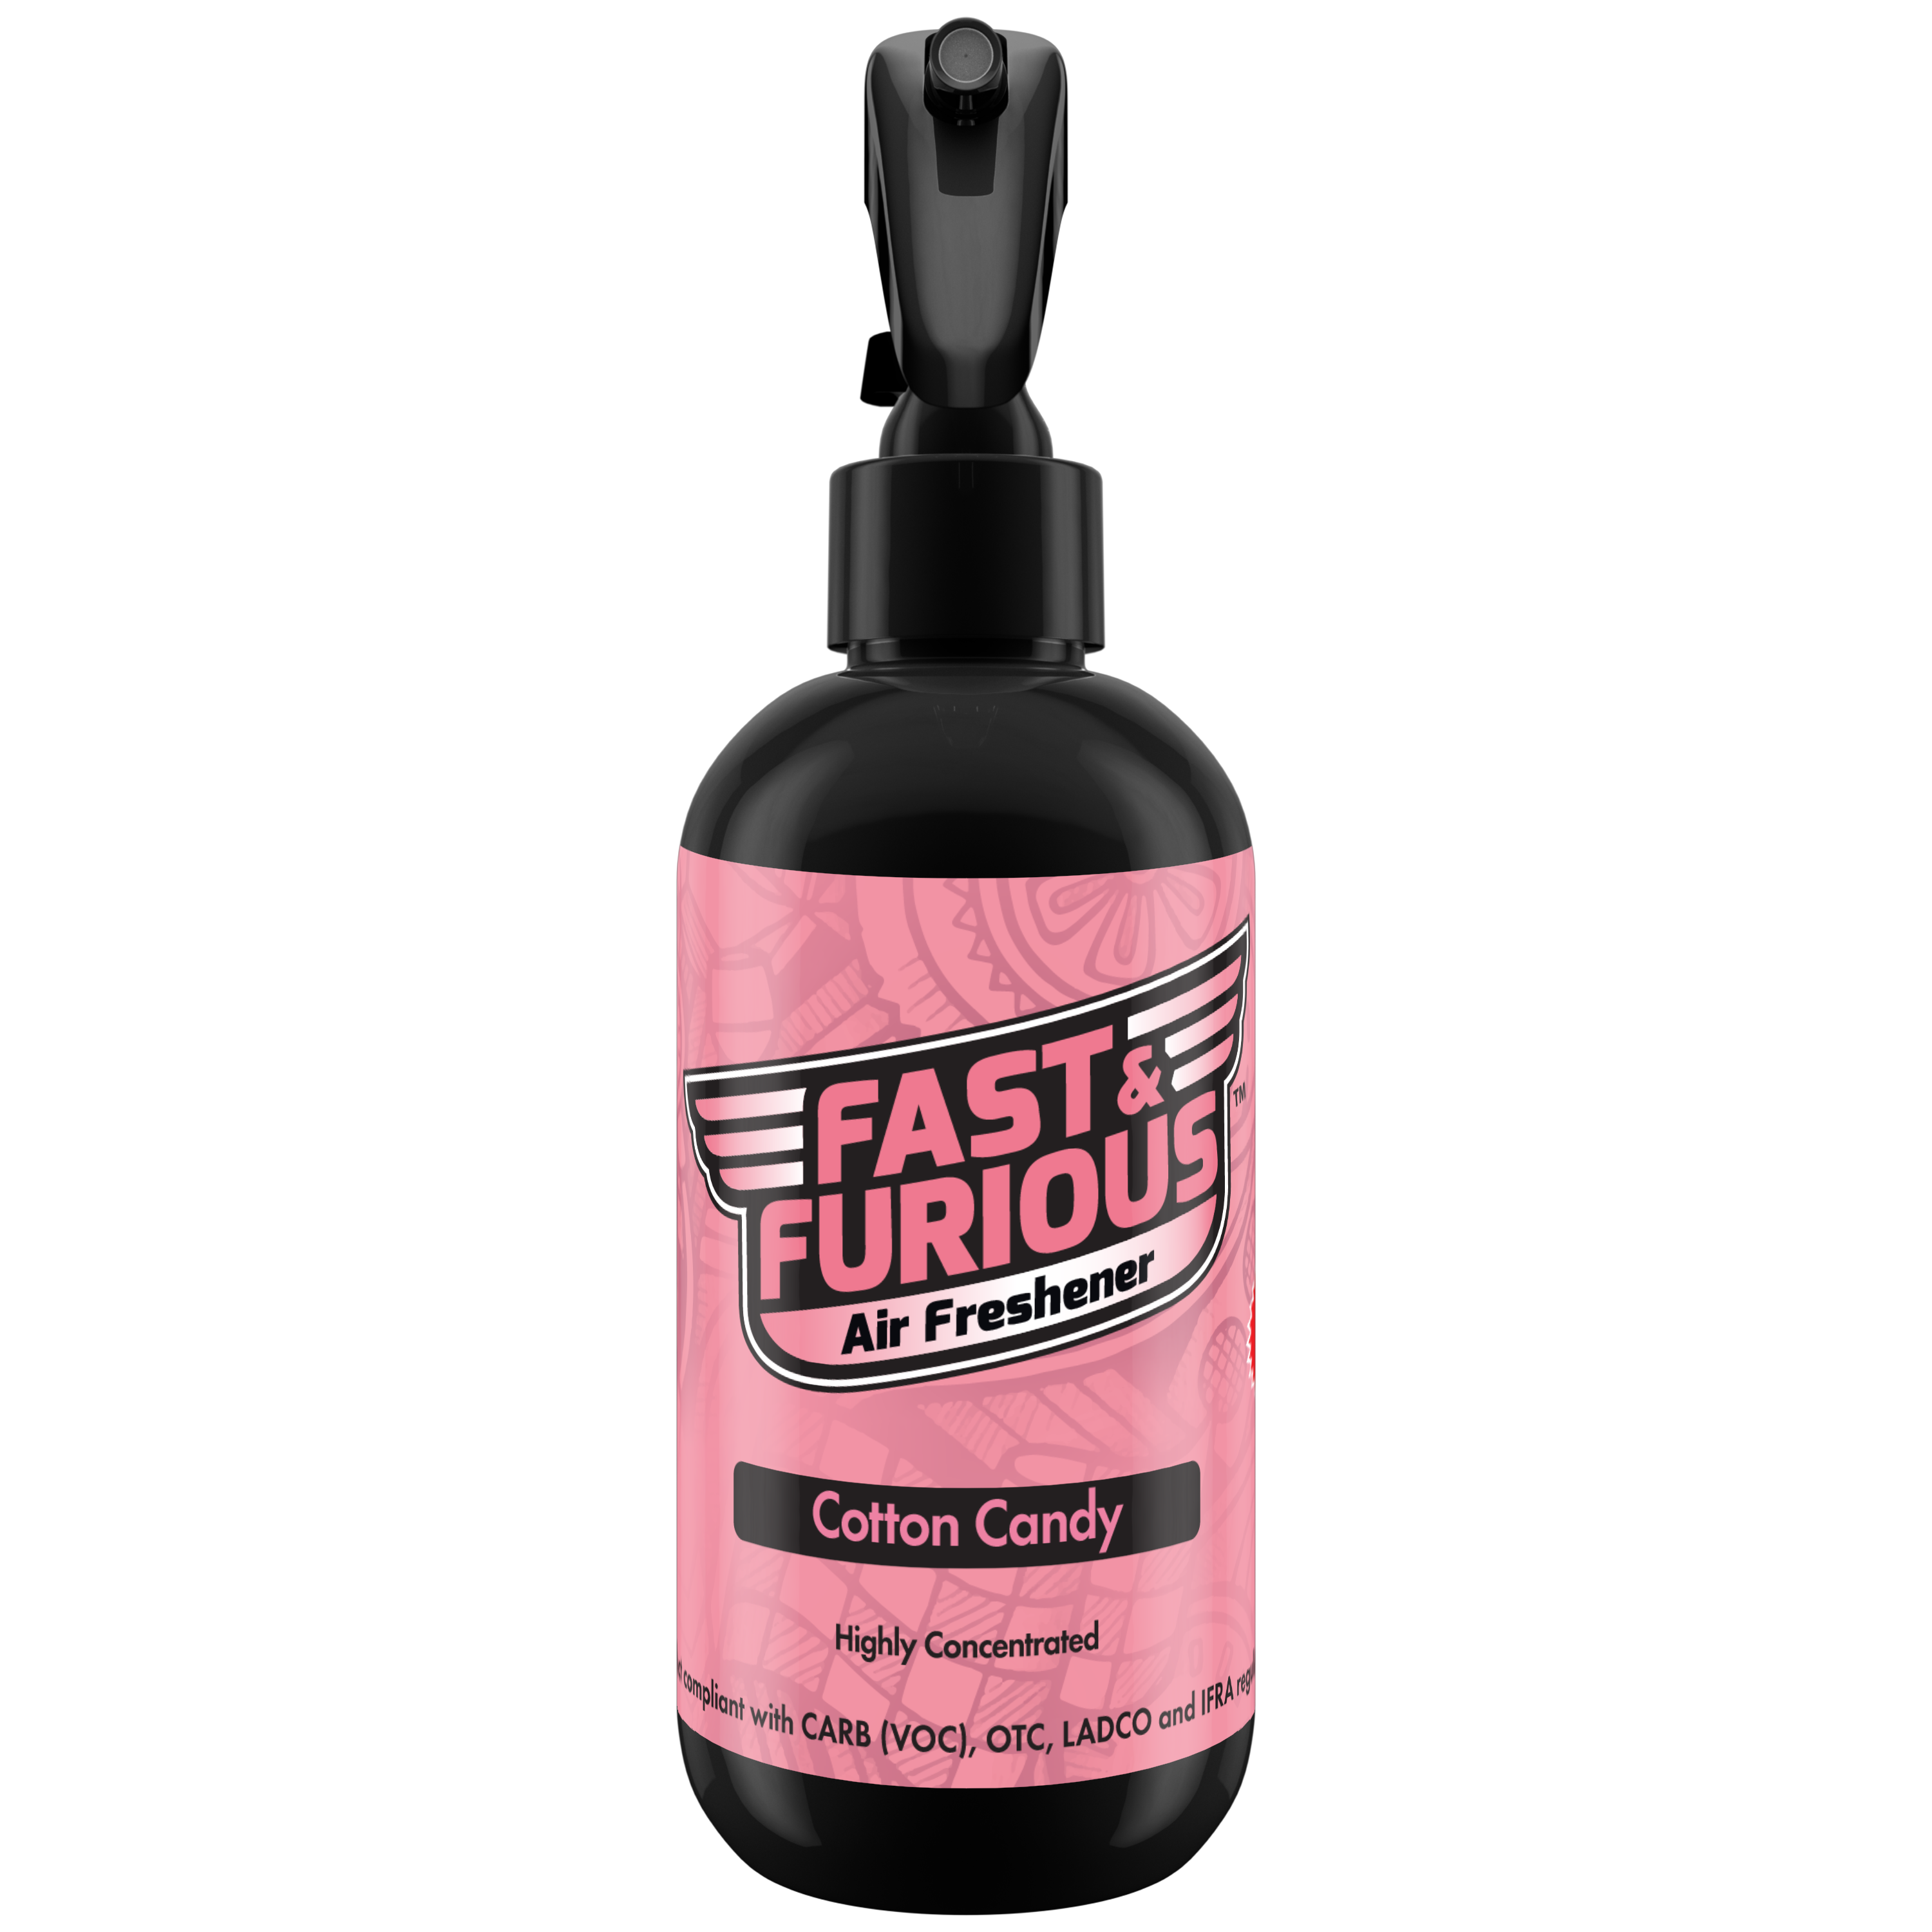 Fast and Furious Air Freshener - Cotton Candy Scent Size: 8oz